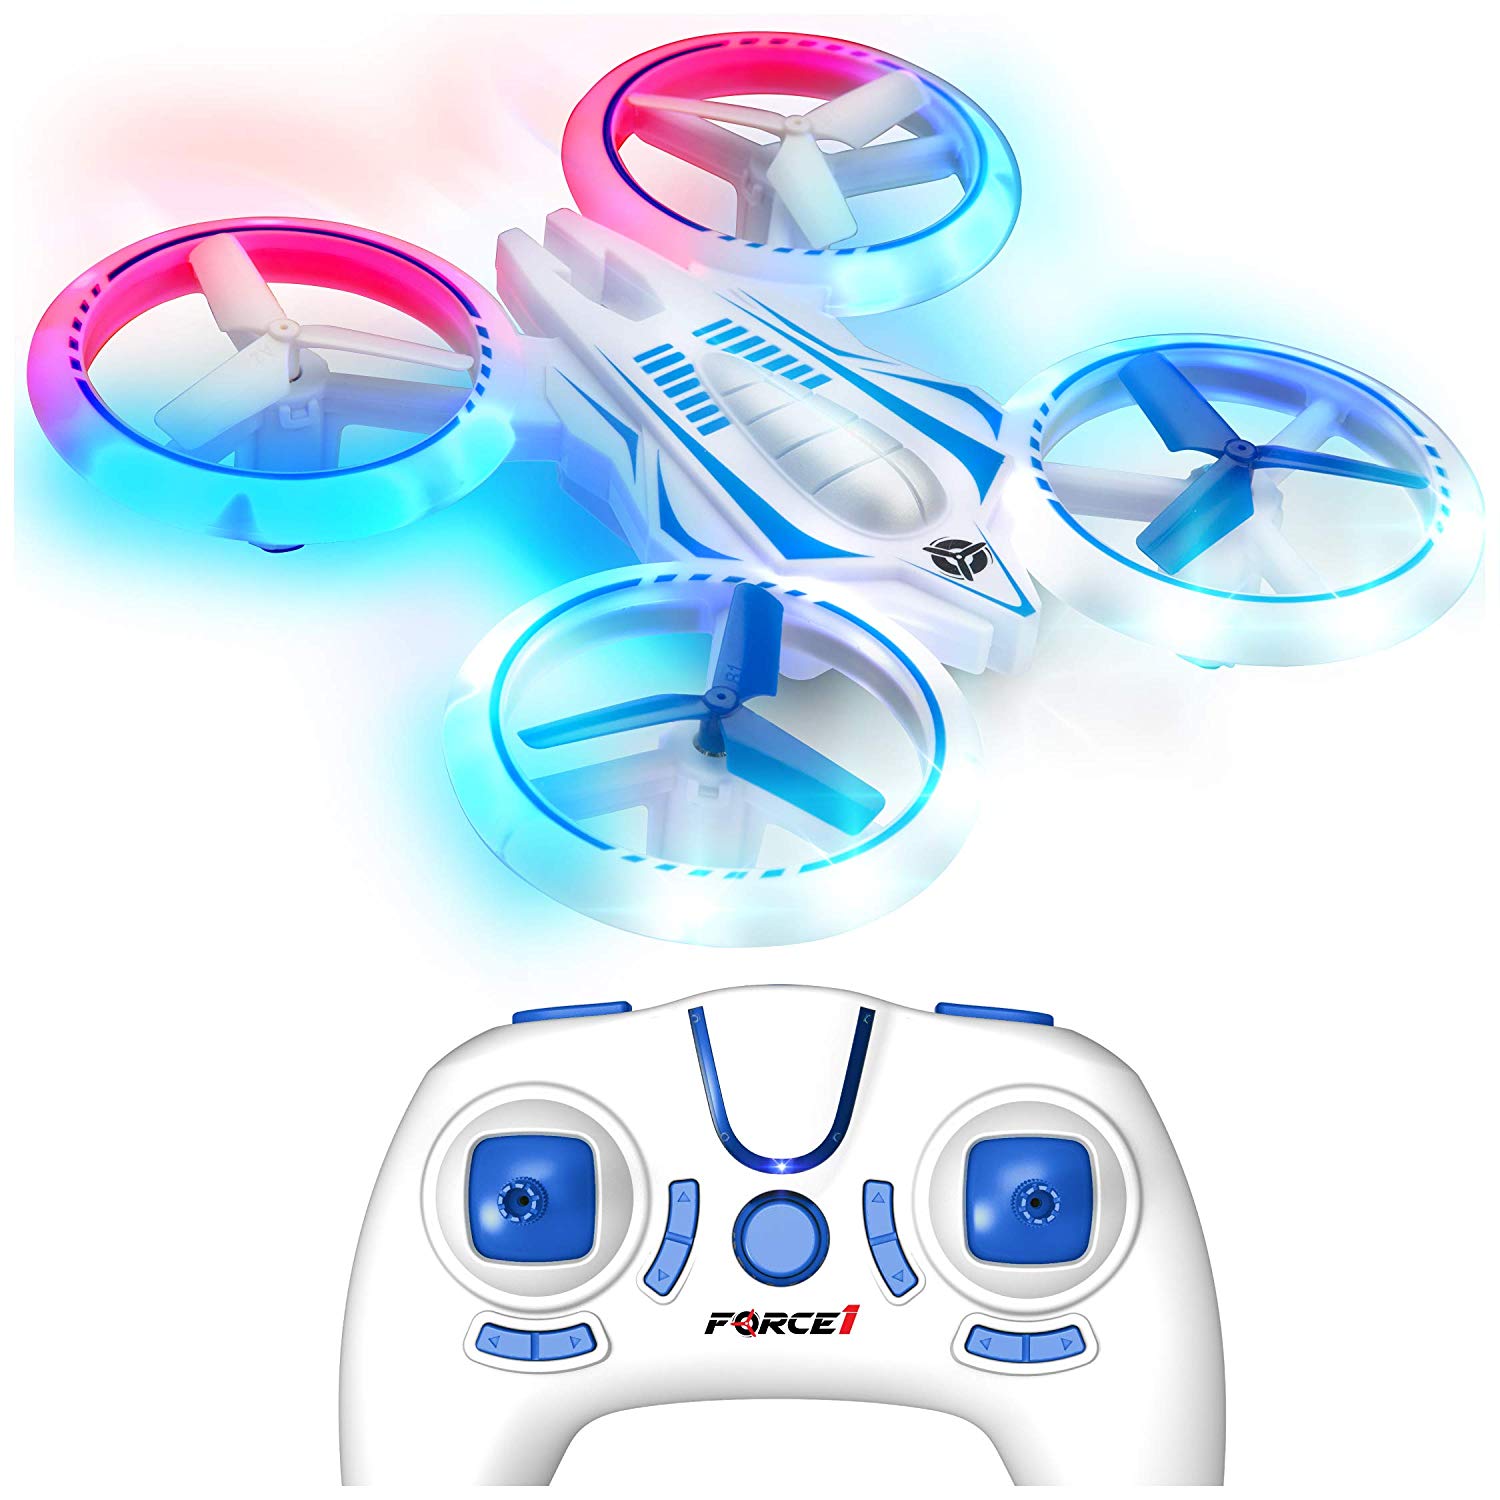 Best Small Indoor Drone for Little Kids Beginners - Here's my big list of Best Toy Gifts for Little Boys. These are the toys my kids actually play with, all the time. Includes small gifts, science kits, art supplies, trucks, and outdoor toys. Plus, 5 toy gift fails. #AbbottsAtHome #BestToys #KidsToys #GiftIdeas #BestGifts #GiftGuide